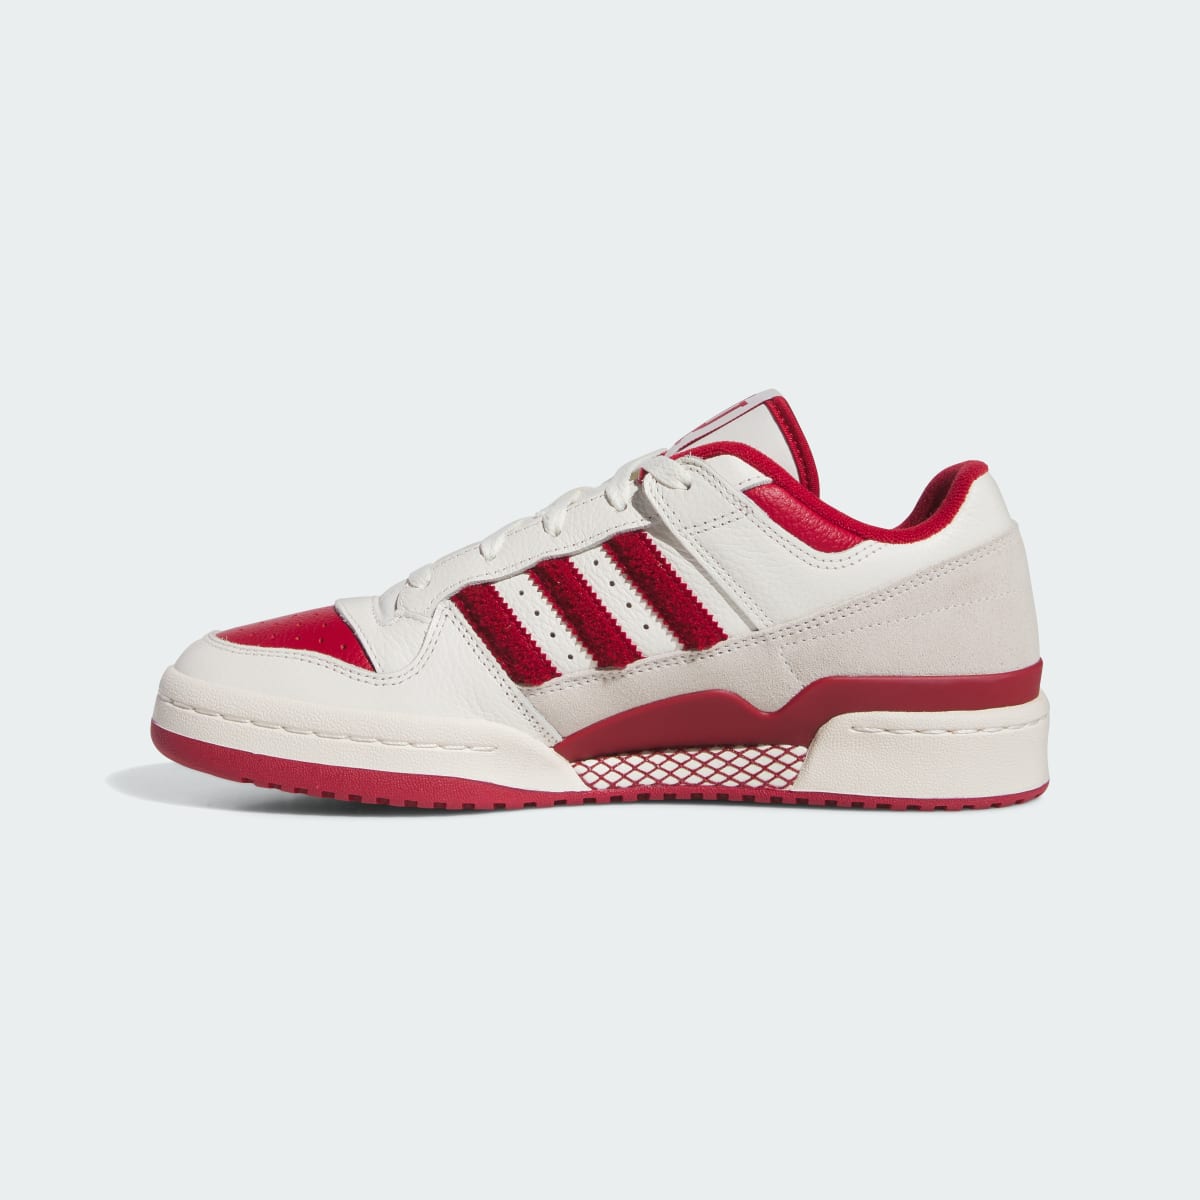 Adidas Indiana Forum Low Shoes. 7